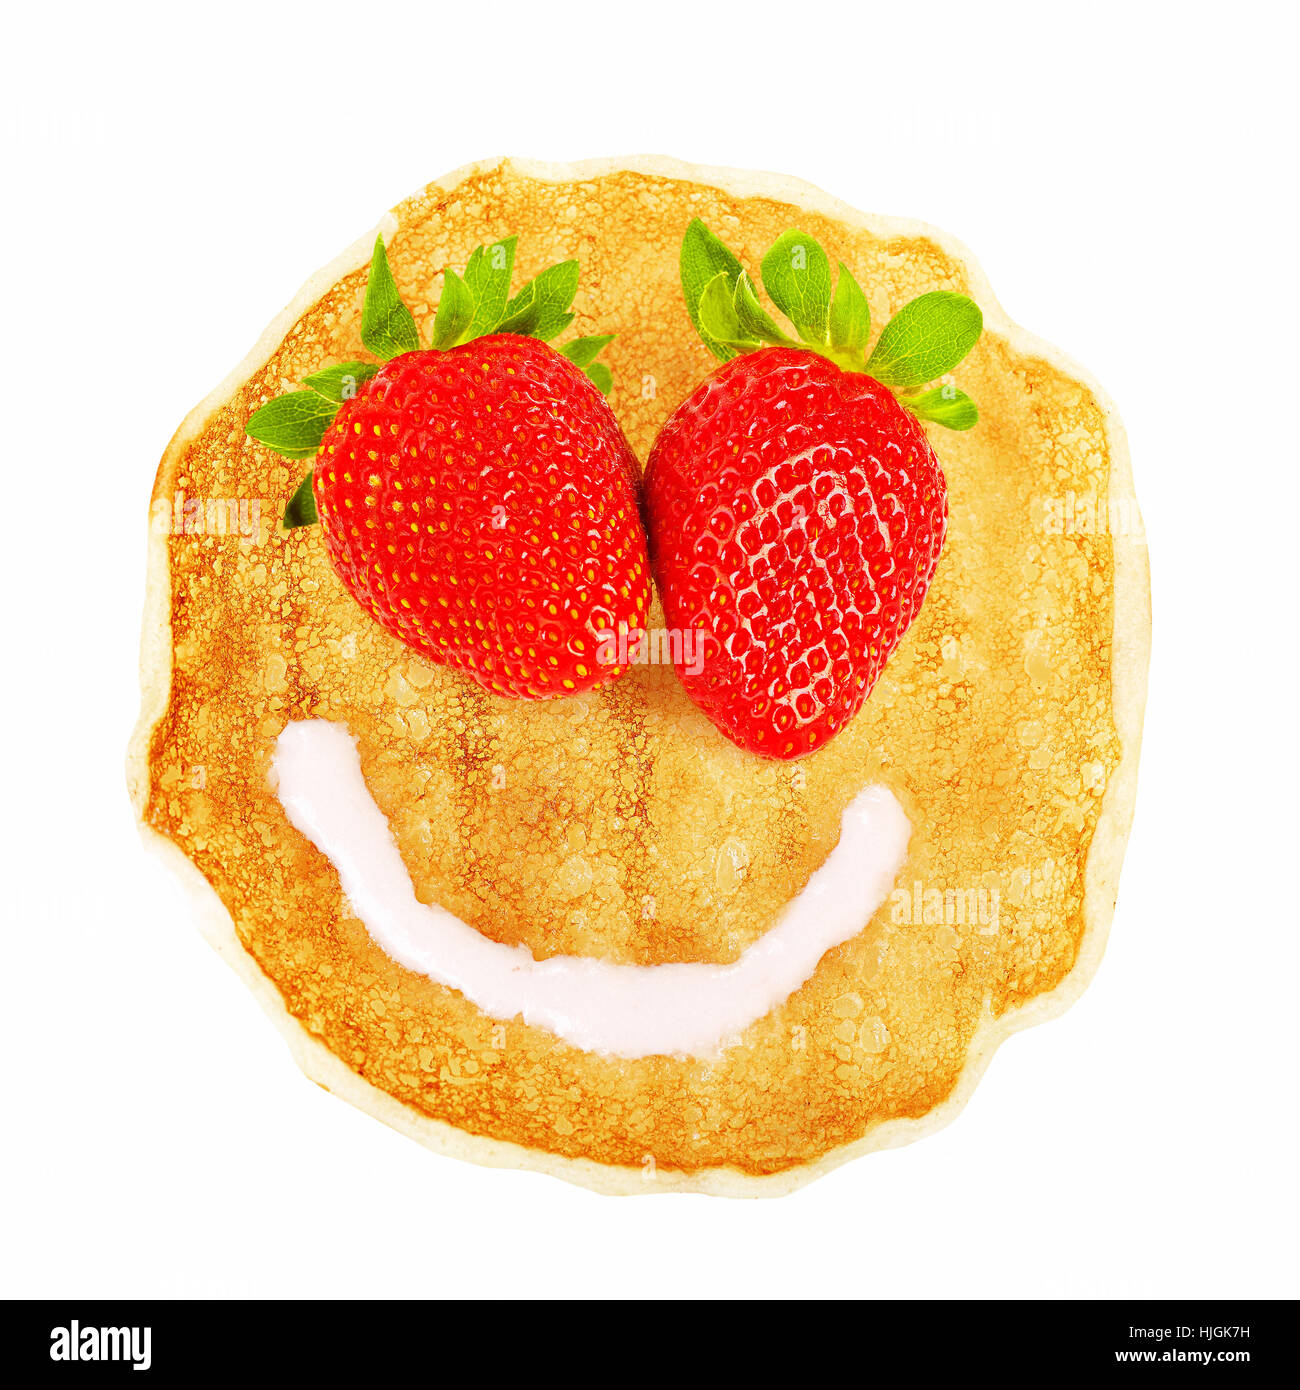 face, eyes, strawberry, smiley, pancake, fried, creamy, red, close, laugh, Stock Photo